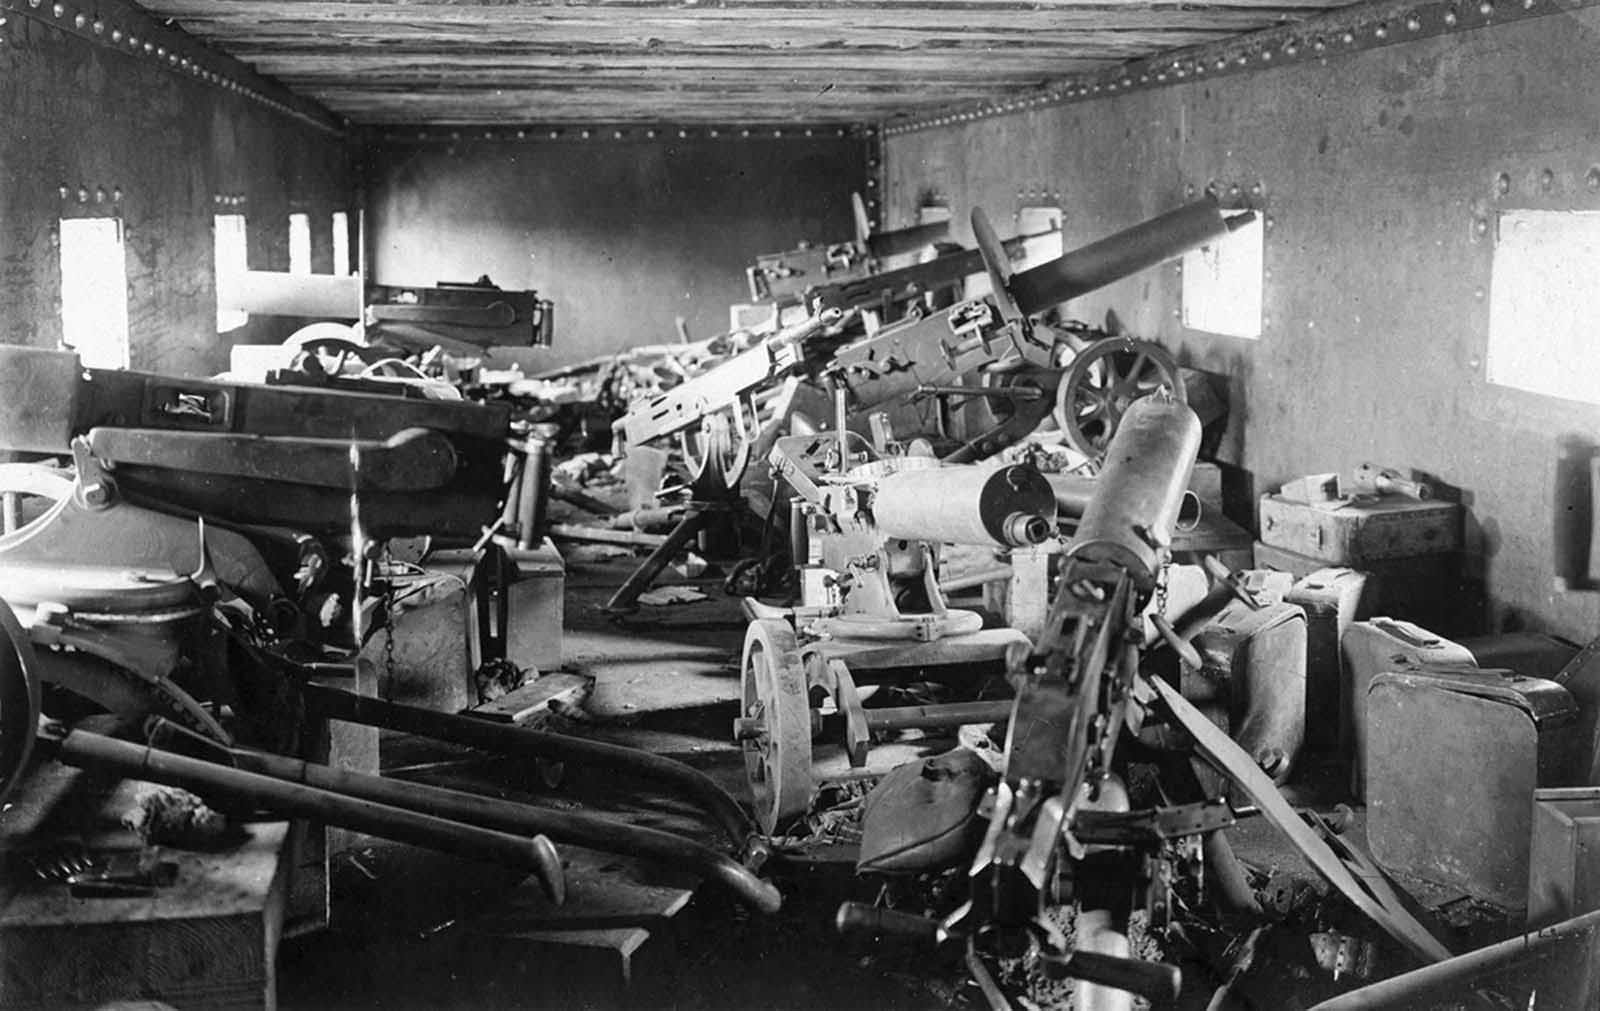 The interior of an armored train car, Chaplino, Dnipropetrovs’ka oblast, Ukraine, in the spring of 1918. At least nine heavy machine guns are visible, as well as many ammunition cases.